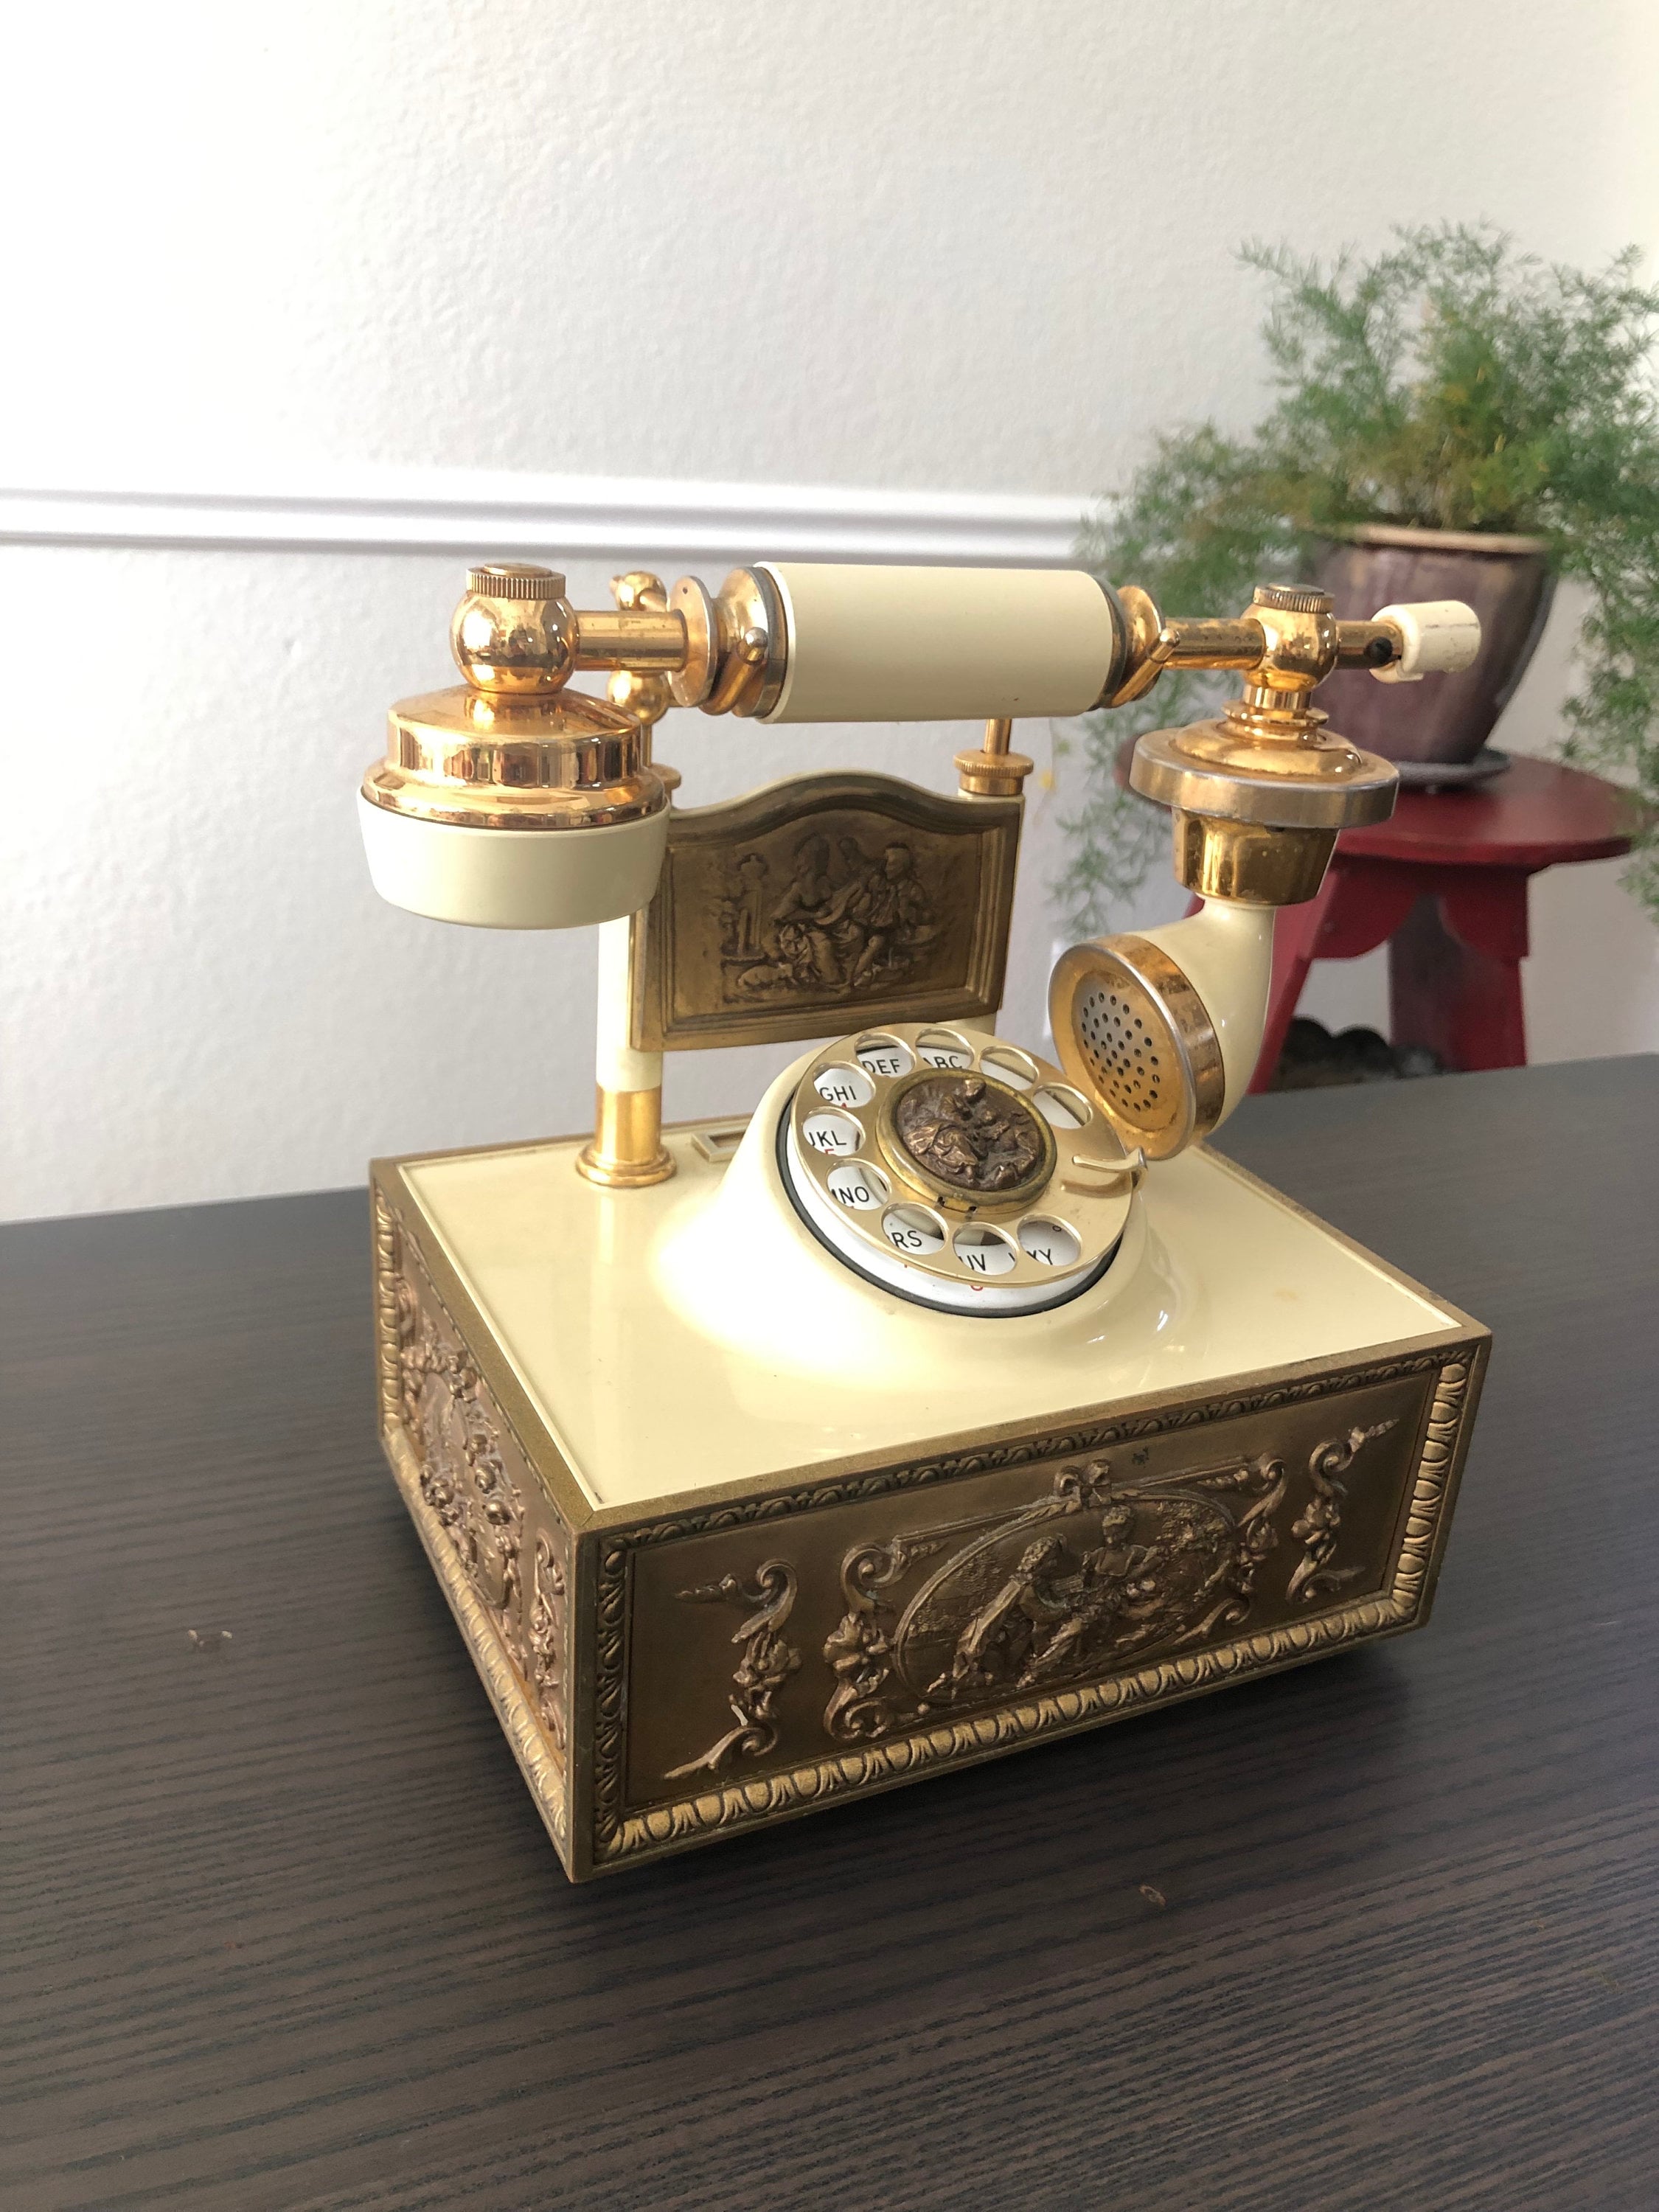 Vintage Deco-tel Rotary Telephone Gold Victorian Cherub Decor, French  Provincial Style Gold Brass Rotary Phone Model D-BM1211W -  Finland